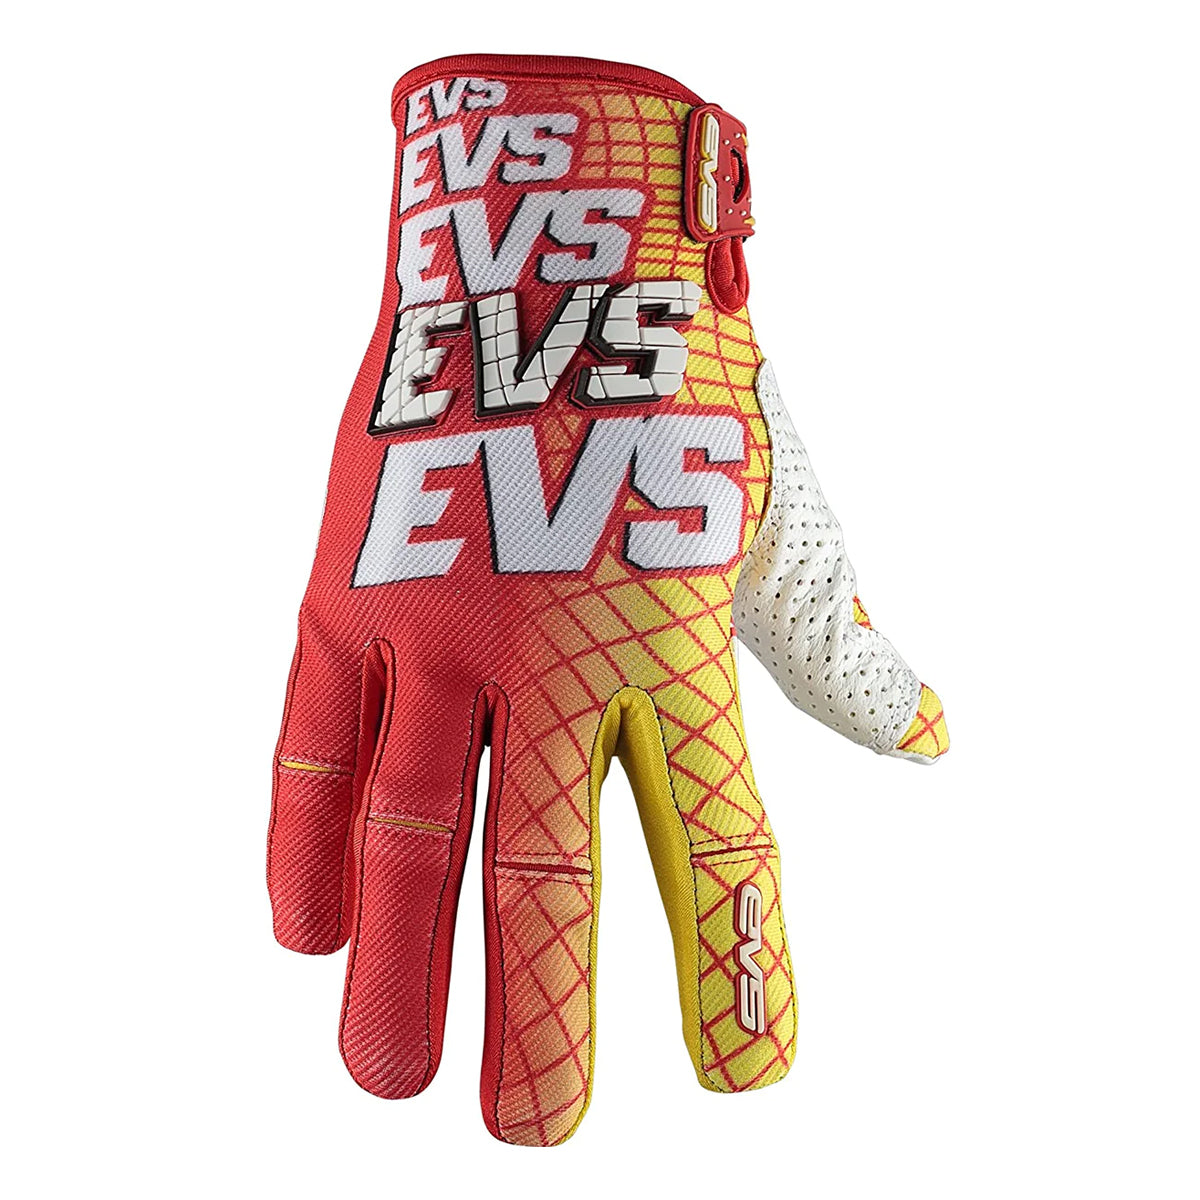 EVS Re-Run Adult Off-Road Gloves